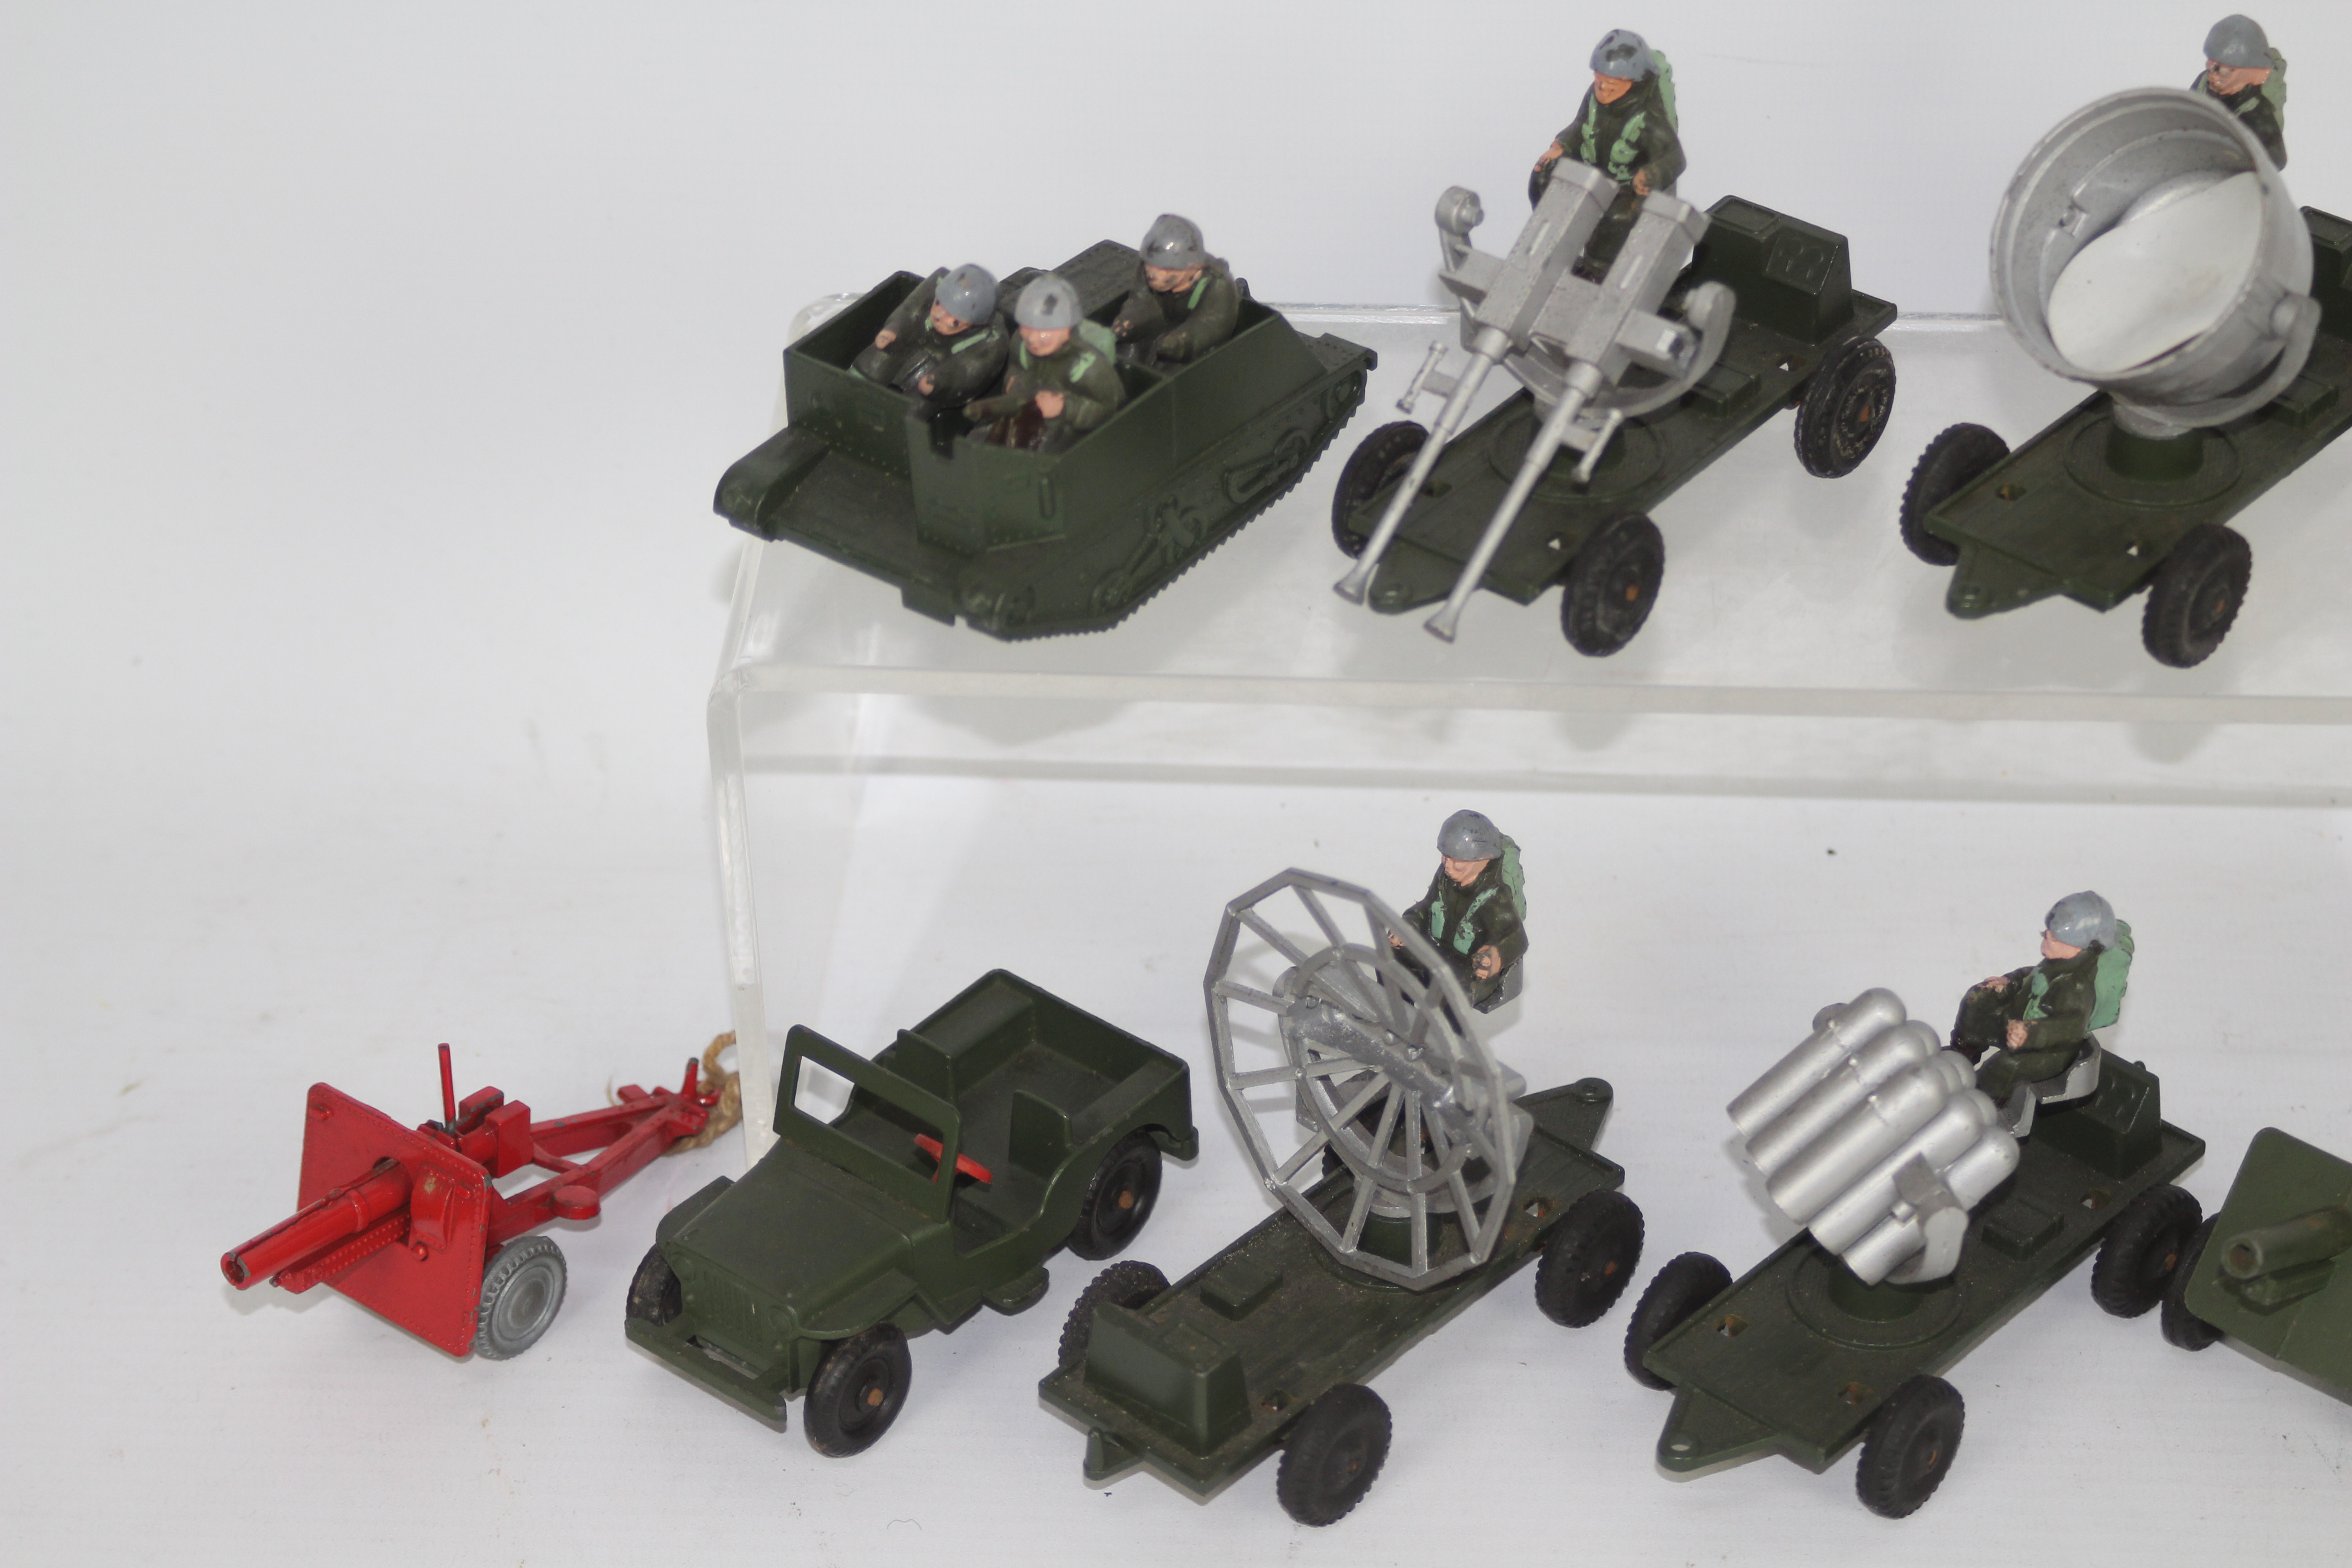 Lone Star - A collection of 9 x Military models including Bren Gun Carrier, 4 x trailers with guns, - Image 3 of 4